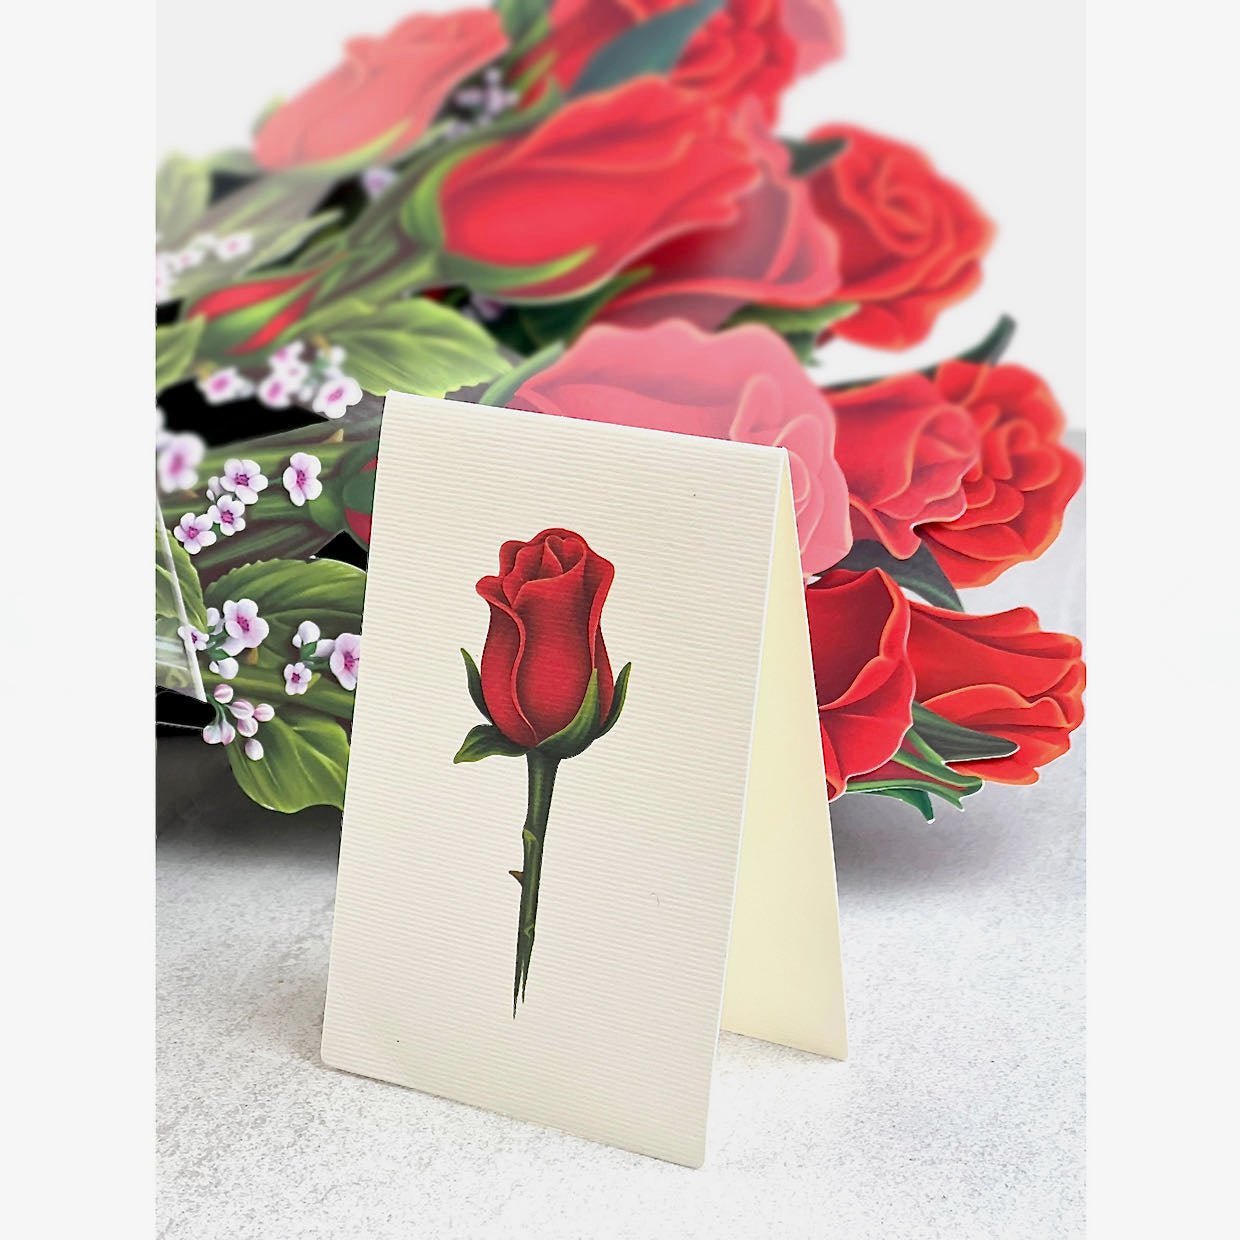 3D Life-Sized Paper Red Roses Bouquet Pop Up Greeting Card - Marmalade Mercantile